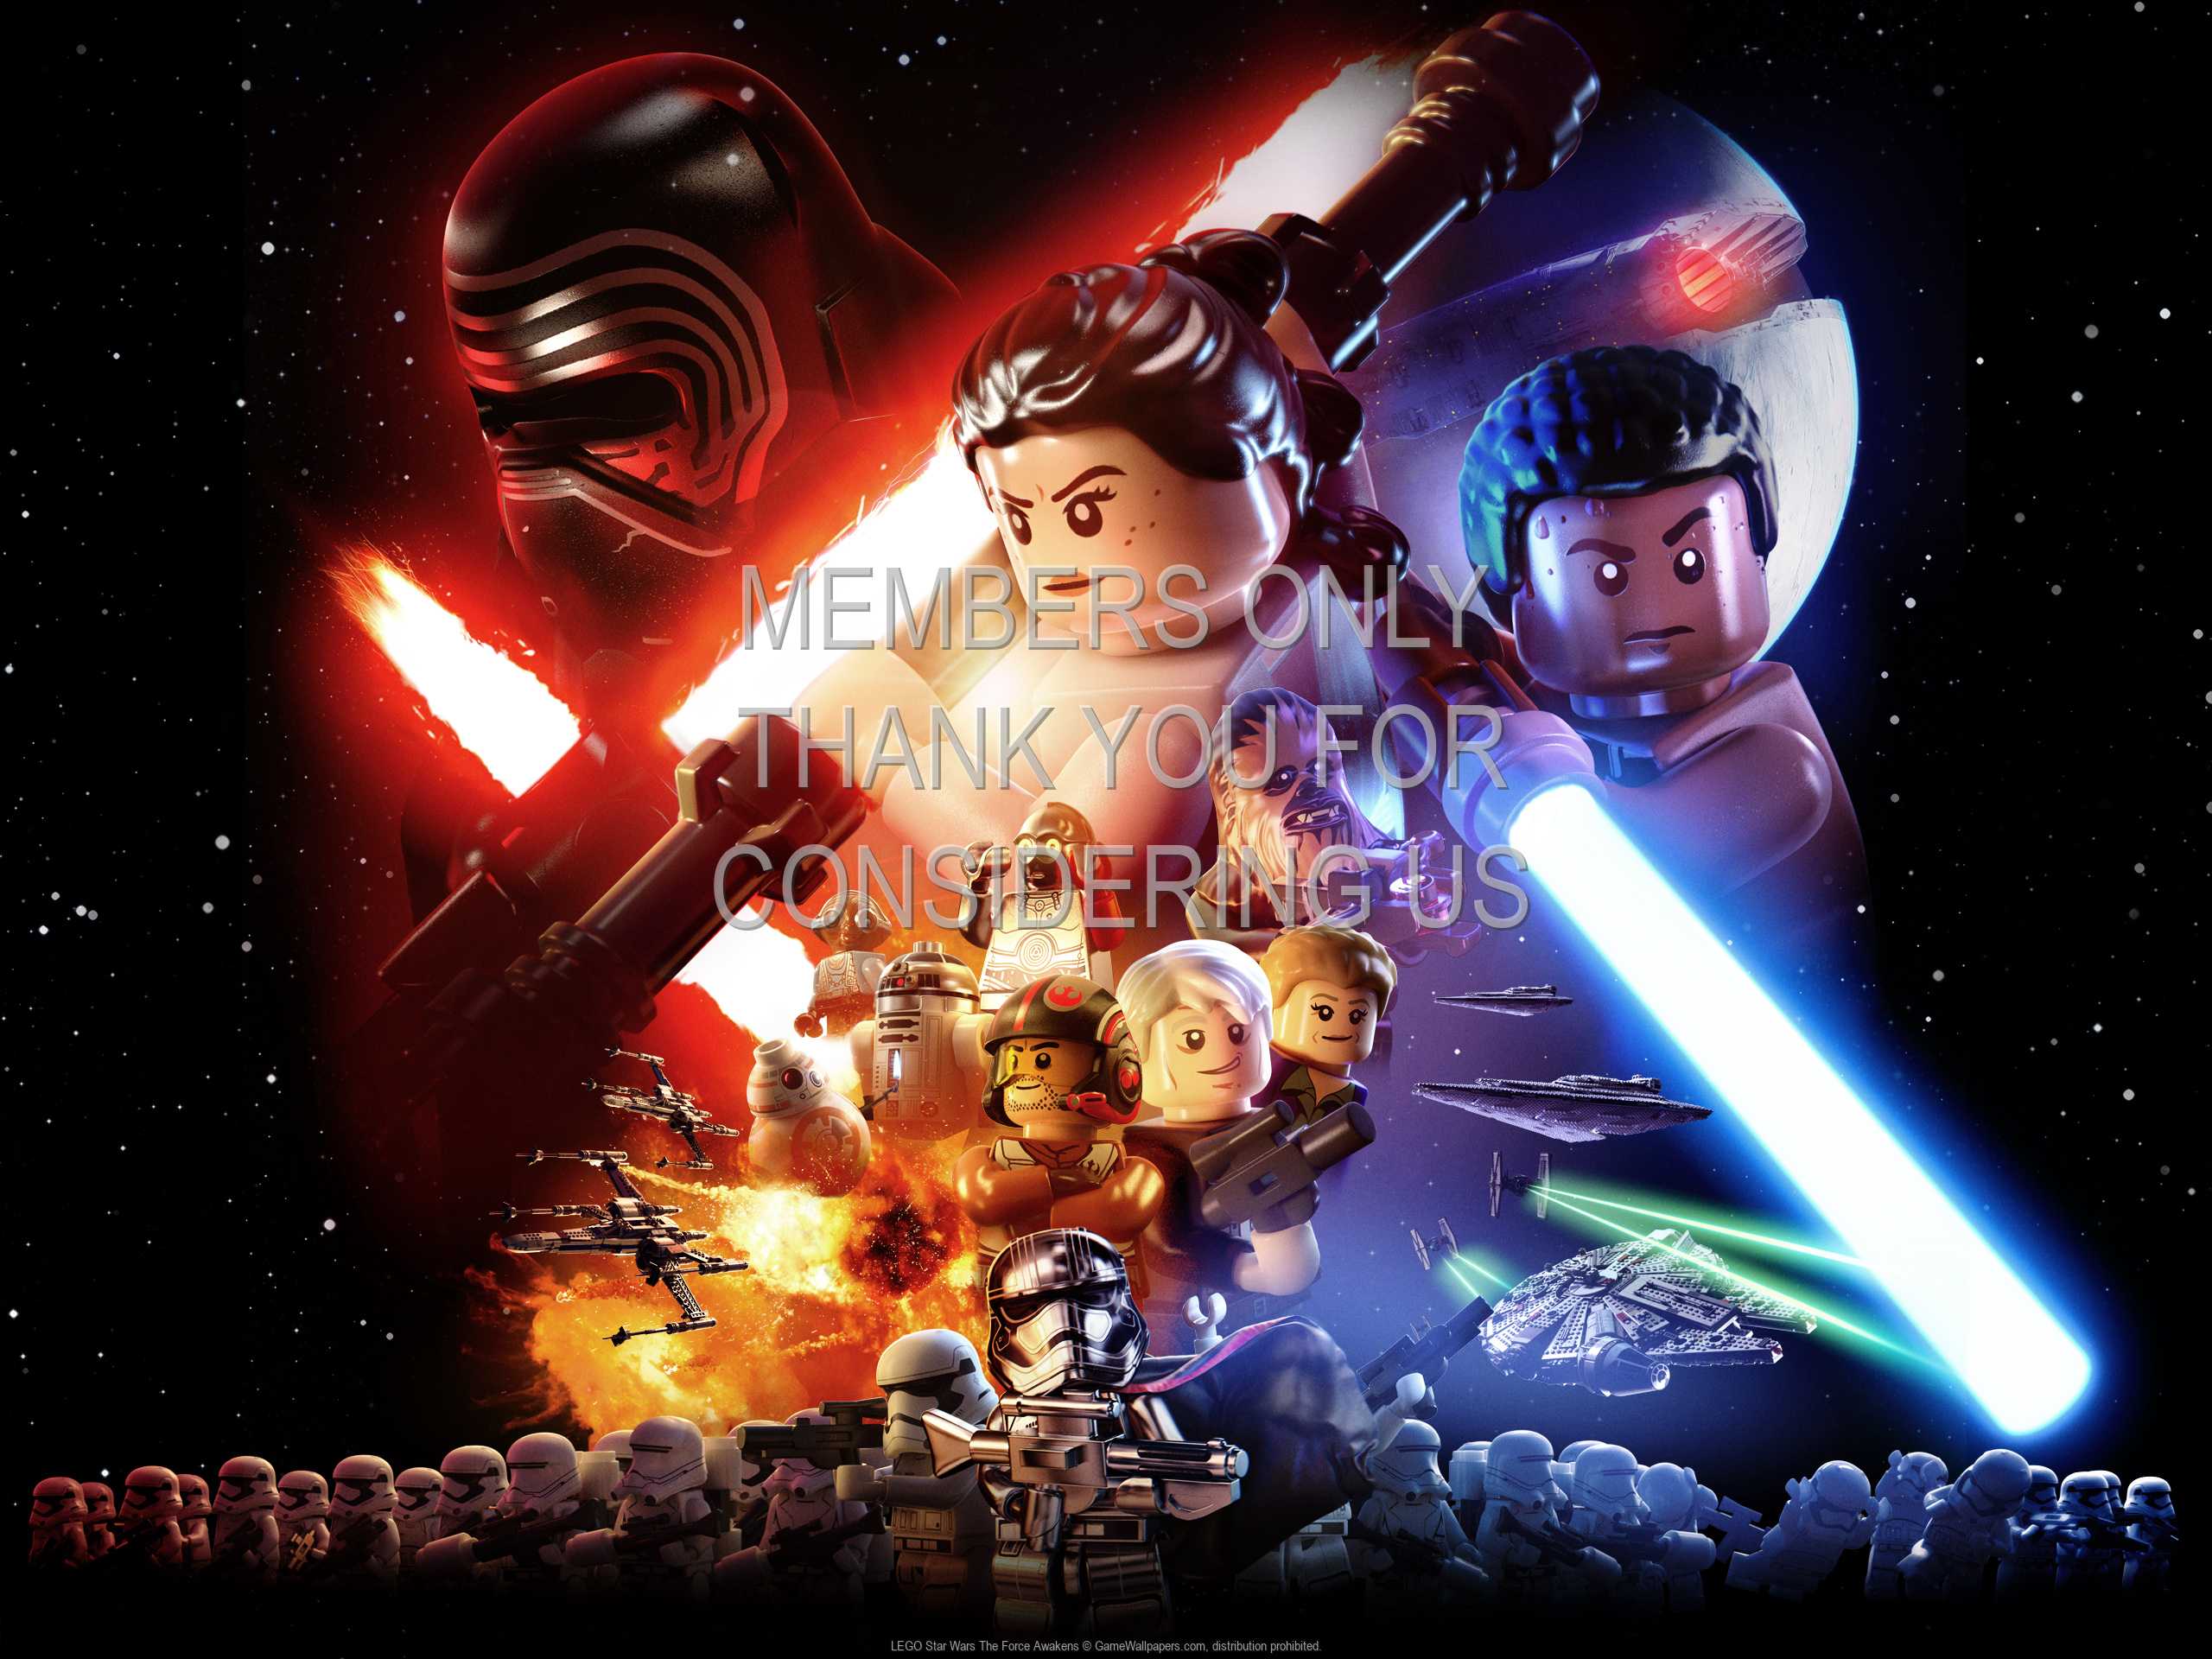 LEGO Star Wars: The Force Awakens 1080p Horizontal Mobile wallpaper or background 01